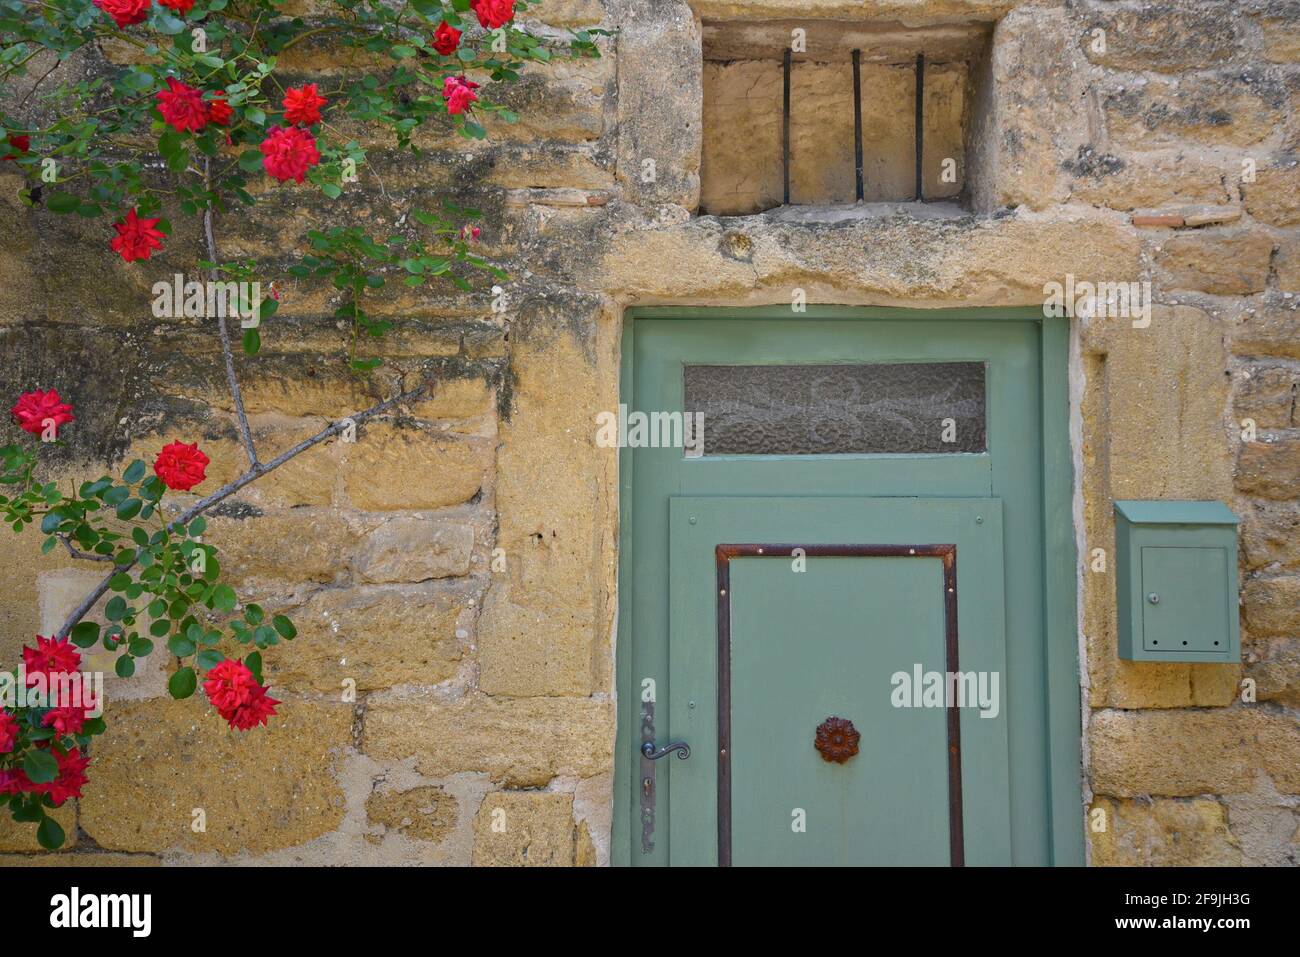 Provençal style rural house facade with an olive green door on a stone wall in the picturesque village of Lourmarin in Vaucluse, Provence France. Stock Photo